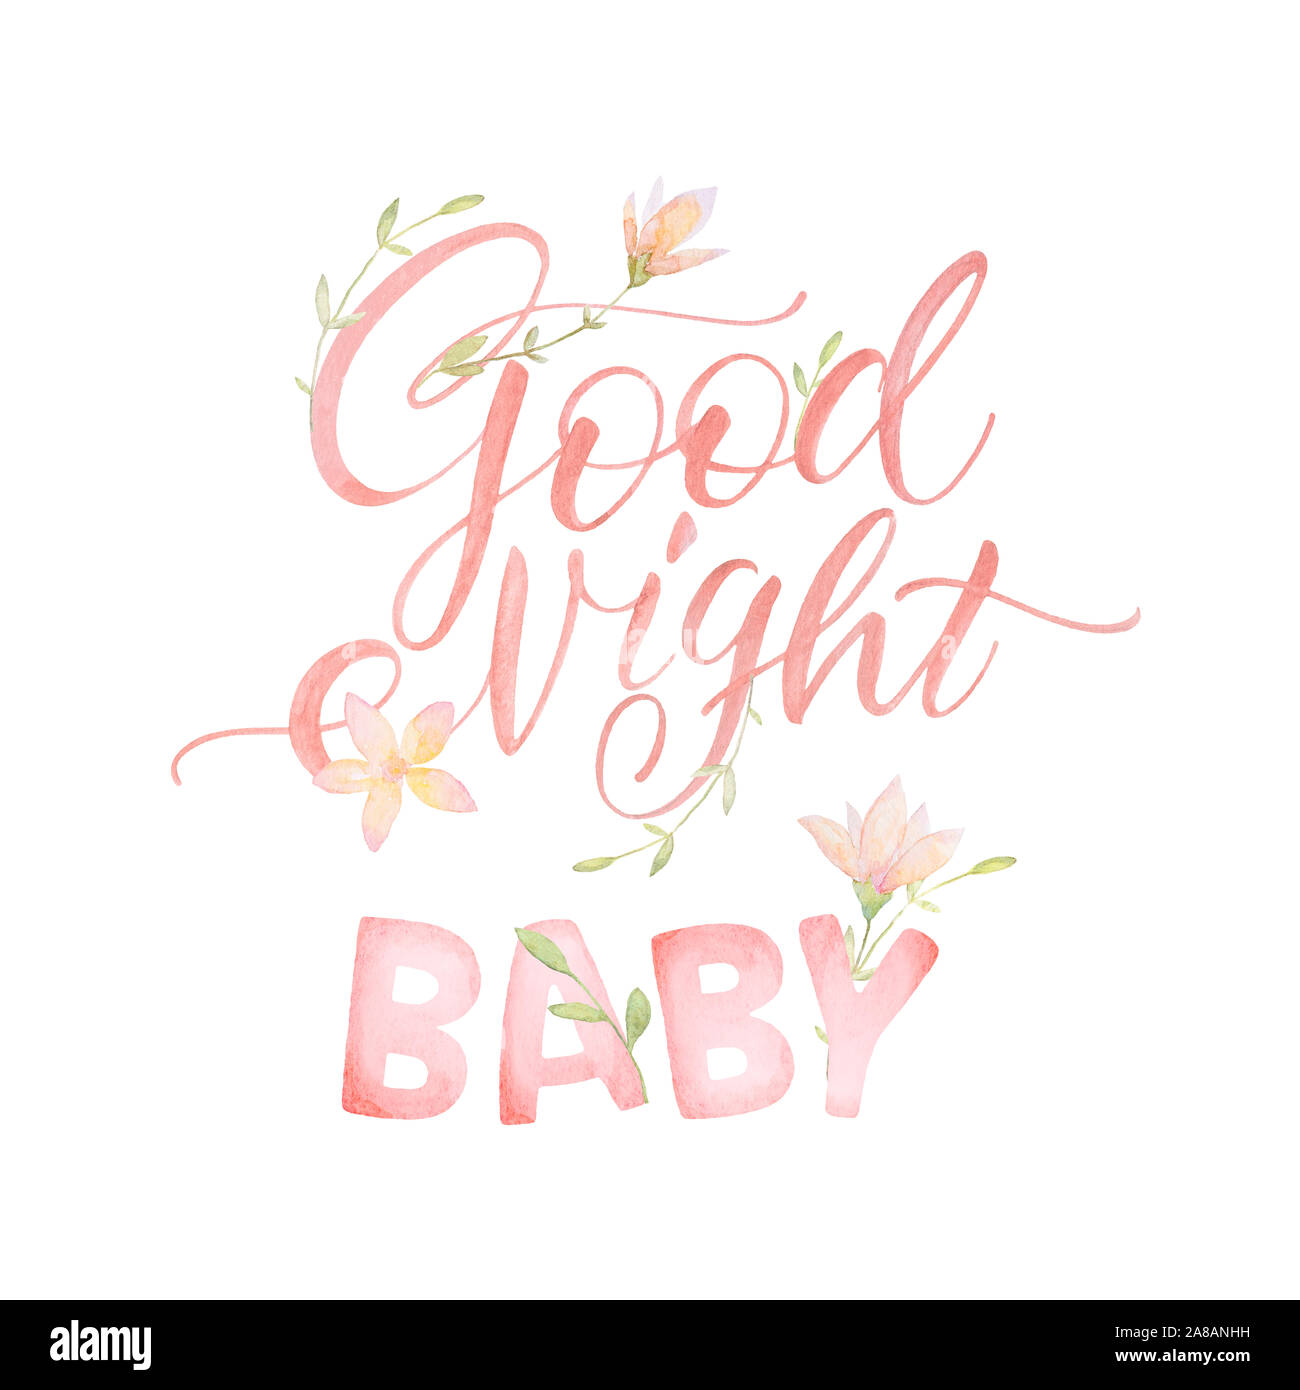 Good night Cut Out Stock Images & Pictures - Alamy